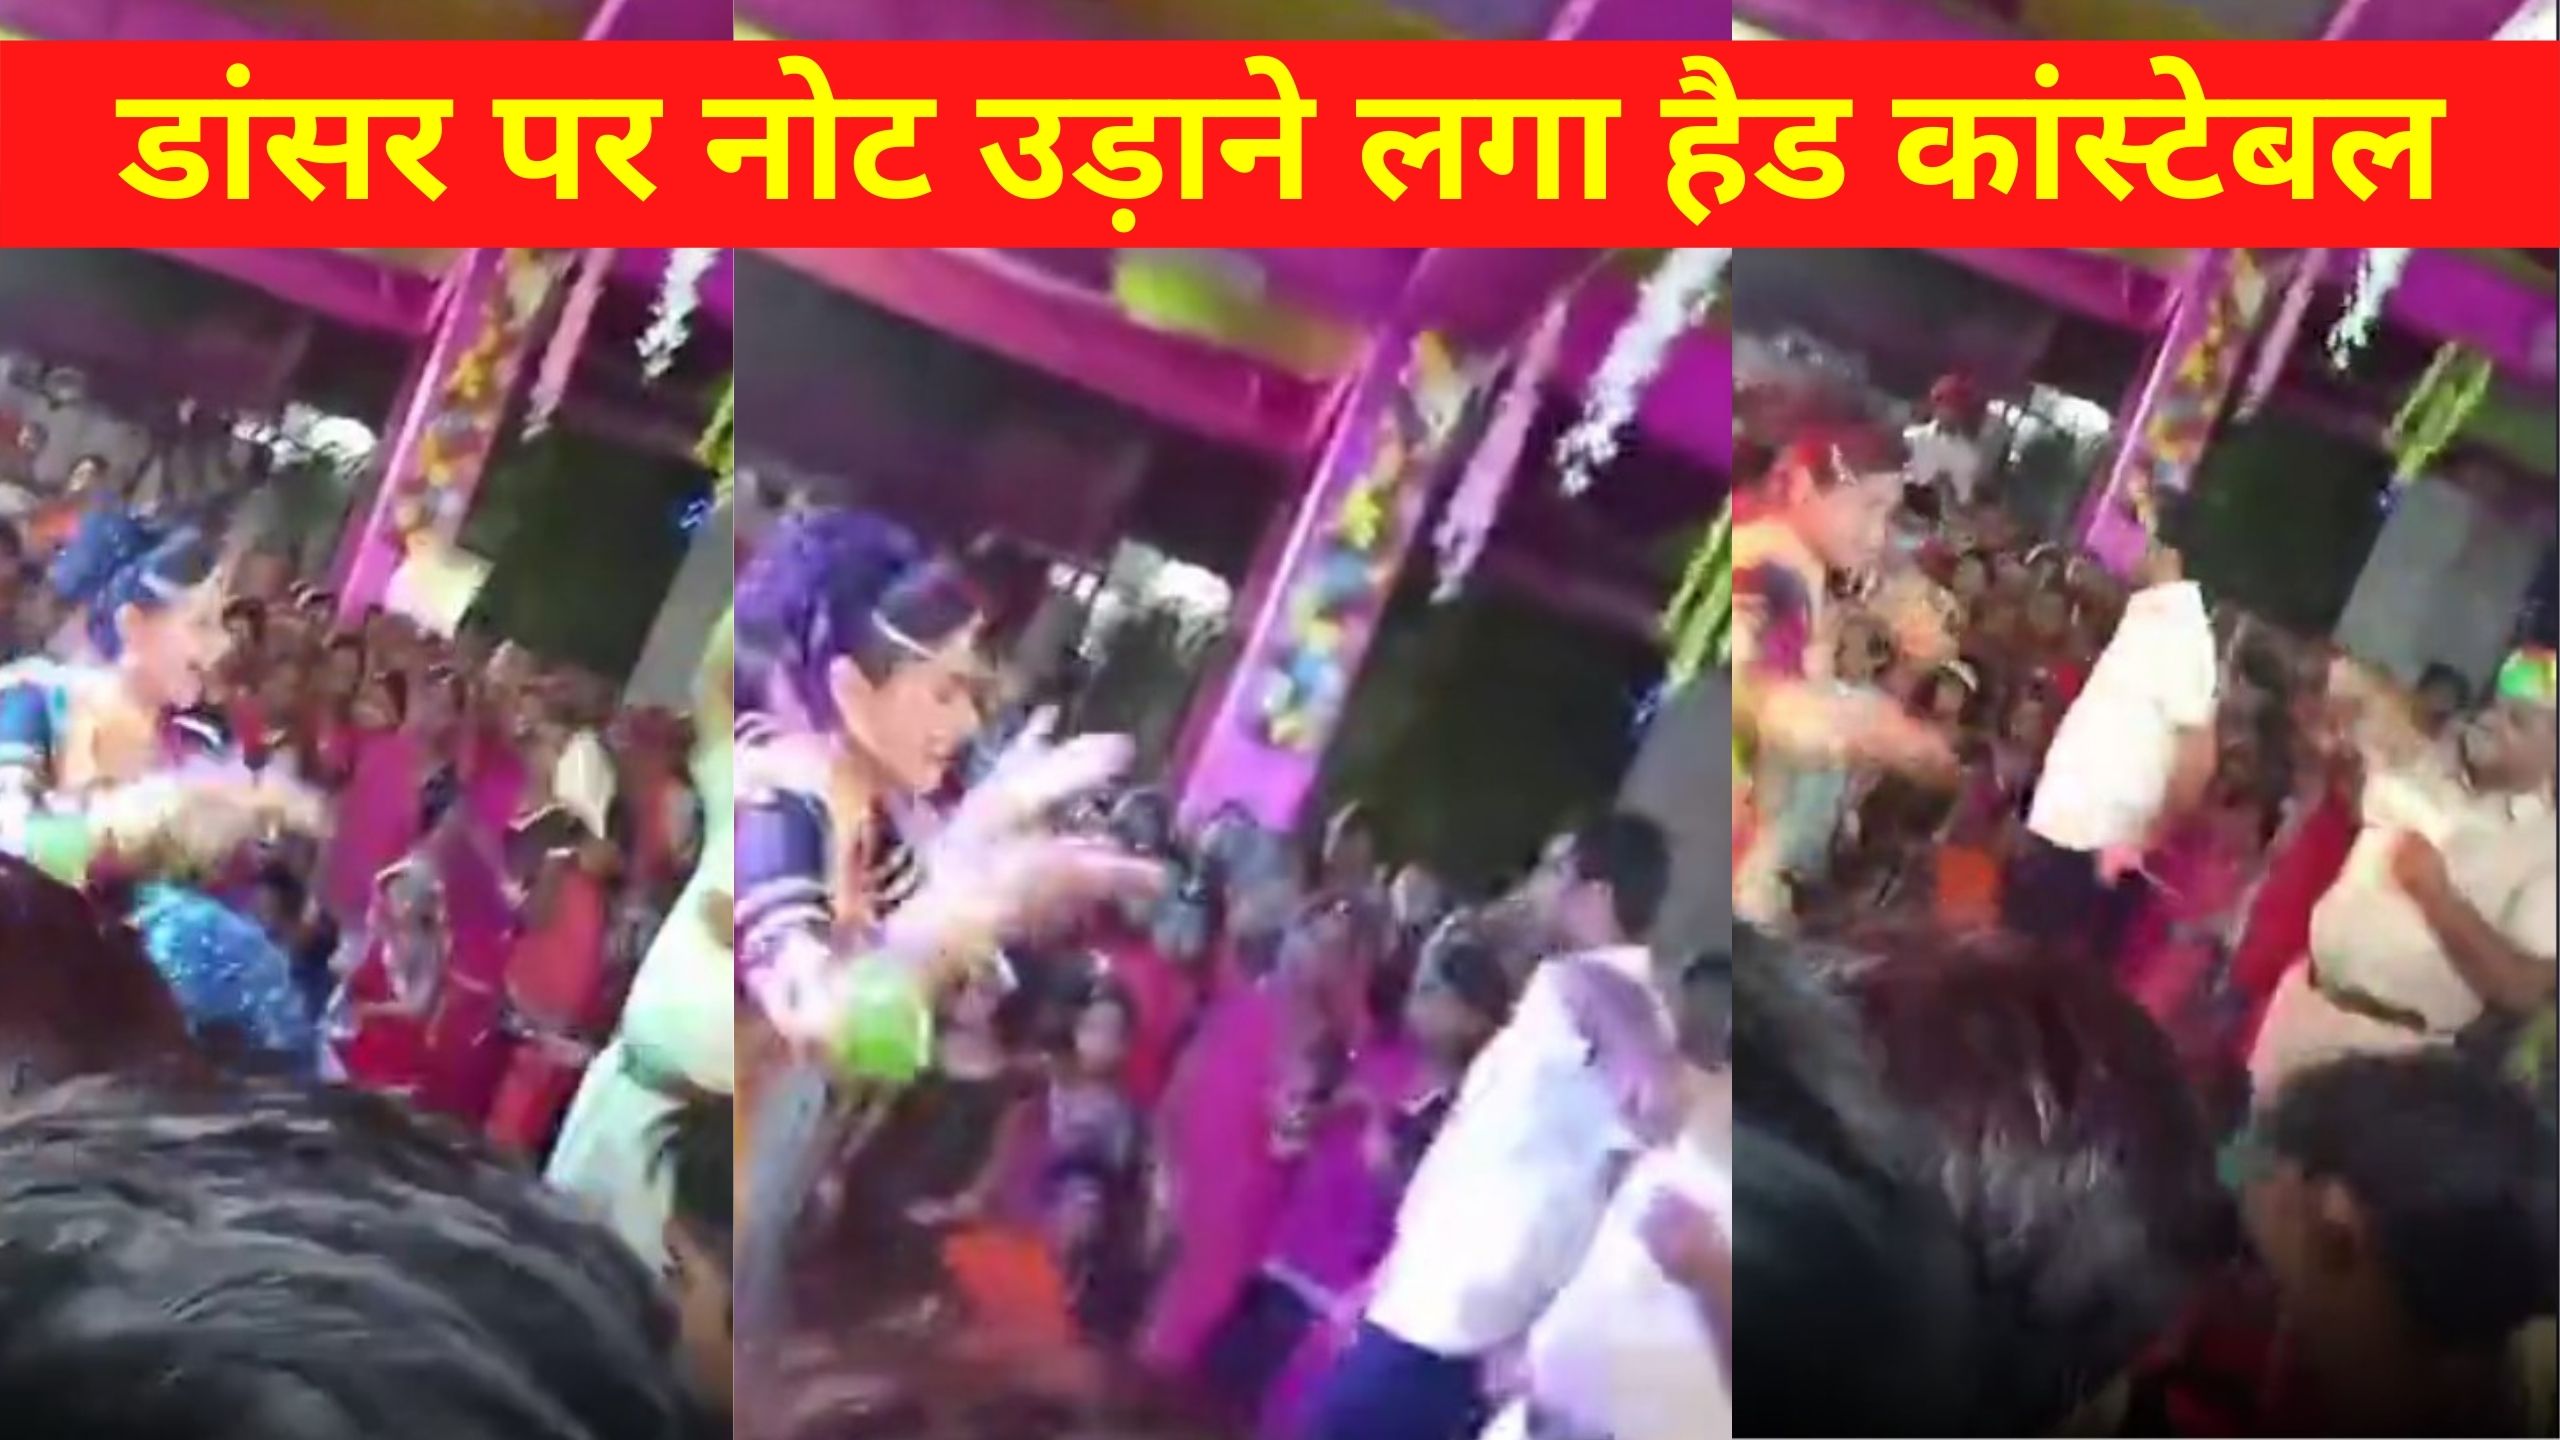 Sirohi SP, Police Head Constable Dance Video, Police Head Constable Shaadi Viral Video, Police Head Constable Dance, Shaadi, Navgana Village, Revdar, Sirohi shaadi Viral Video, Sirohi Viral video, marriage anniversary wishes, marriage, marriage wishes, happy marriage anniversary, marriage story, first love marriage in the world, marriage matching, street dancer, india best dancer, super dancer, bar dancer, lucky dancer, dancer, viral video, video viral, viral video india, video viral video, new viral video, dance video, dance video app, dance video creator, video dance,Sirohi, shaadi, shaadi mein zaroor aana, shaadi Mubarak, Corona Guidelines,